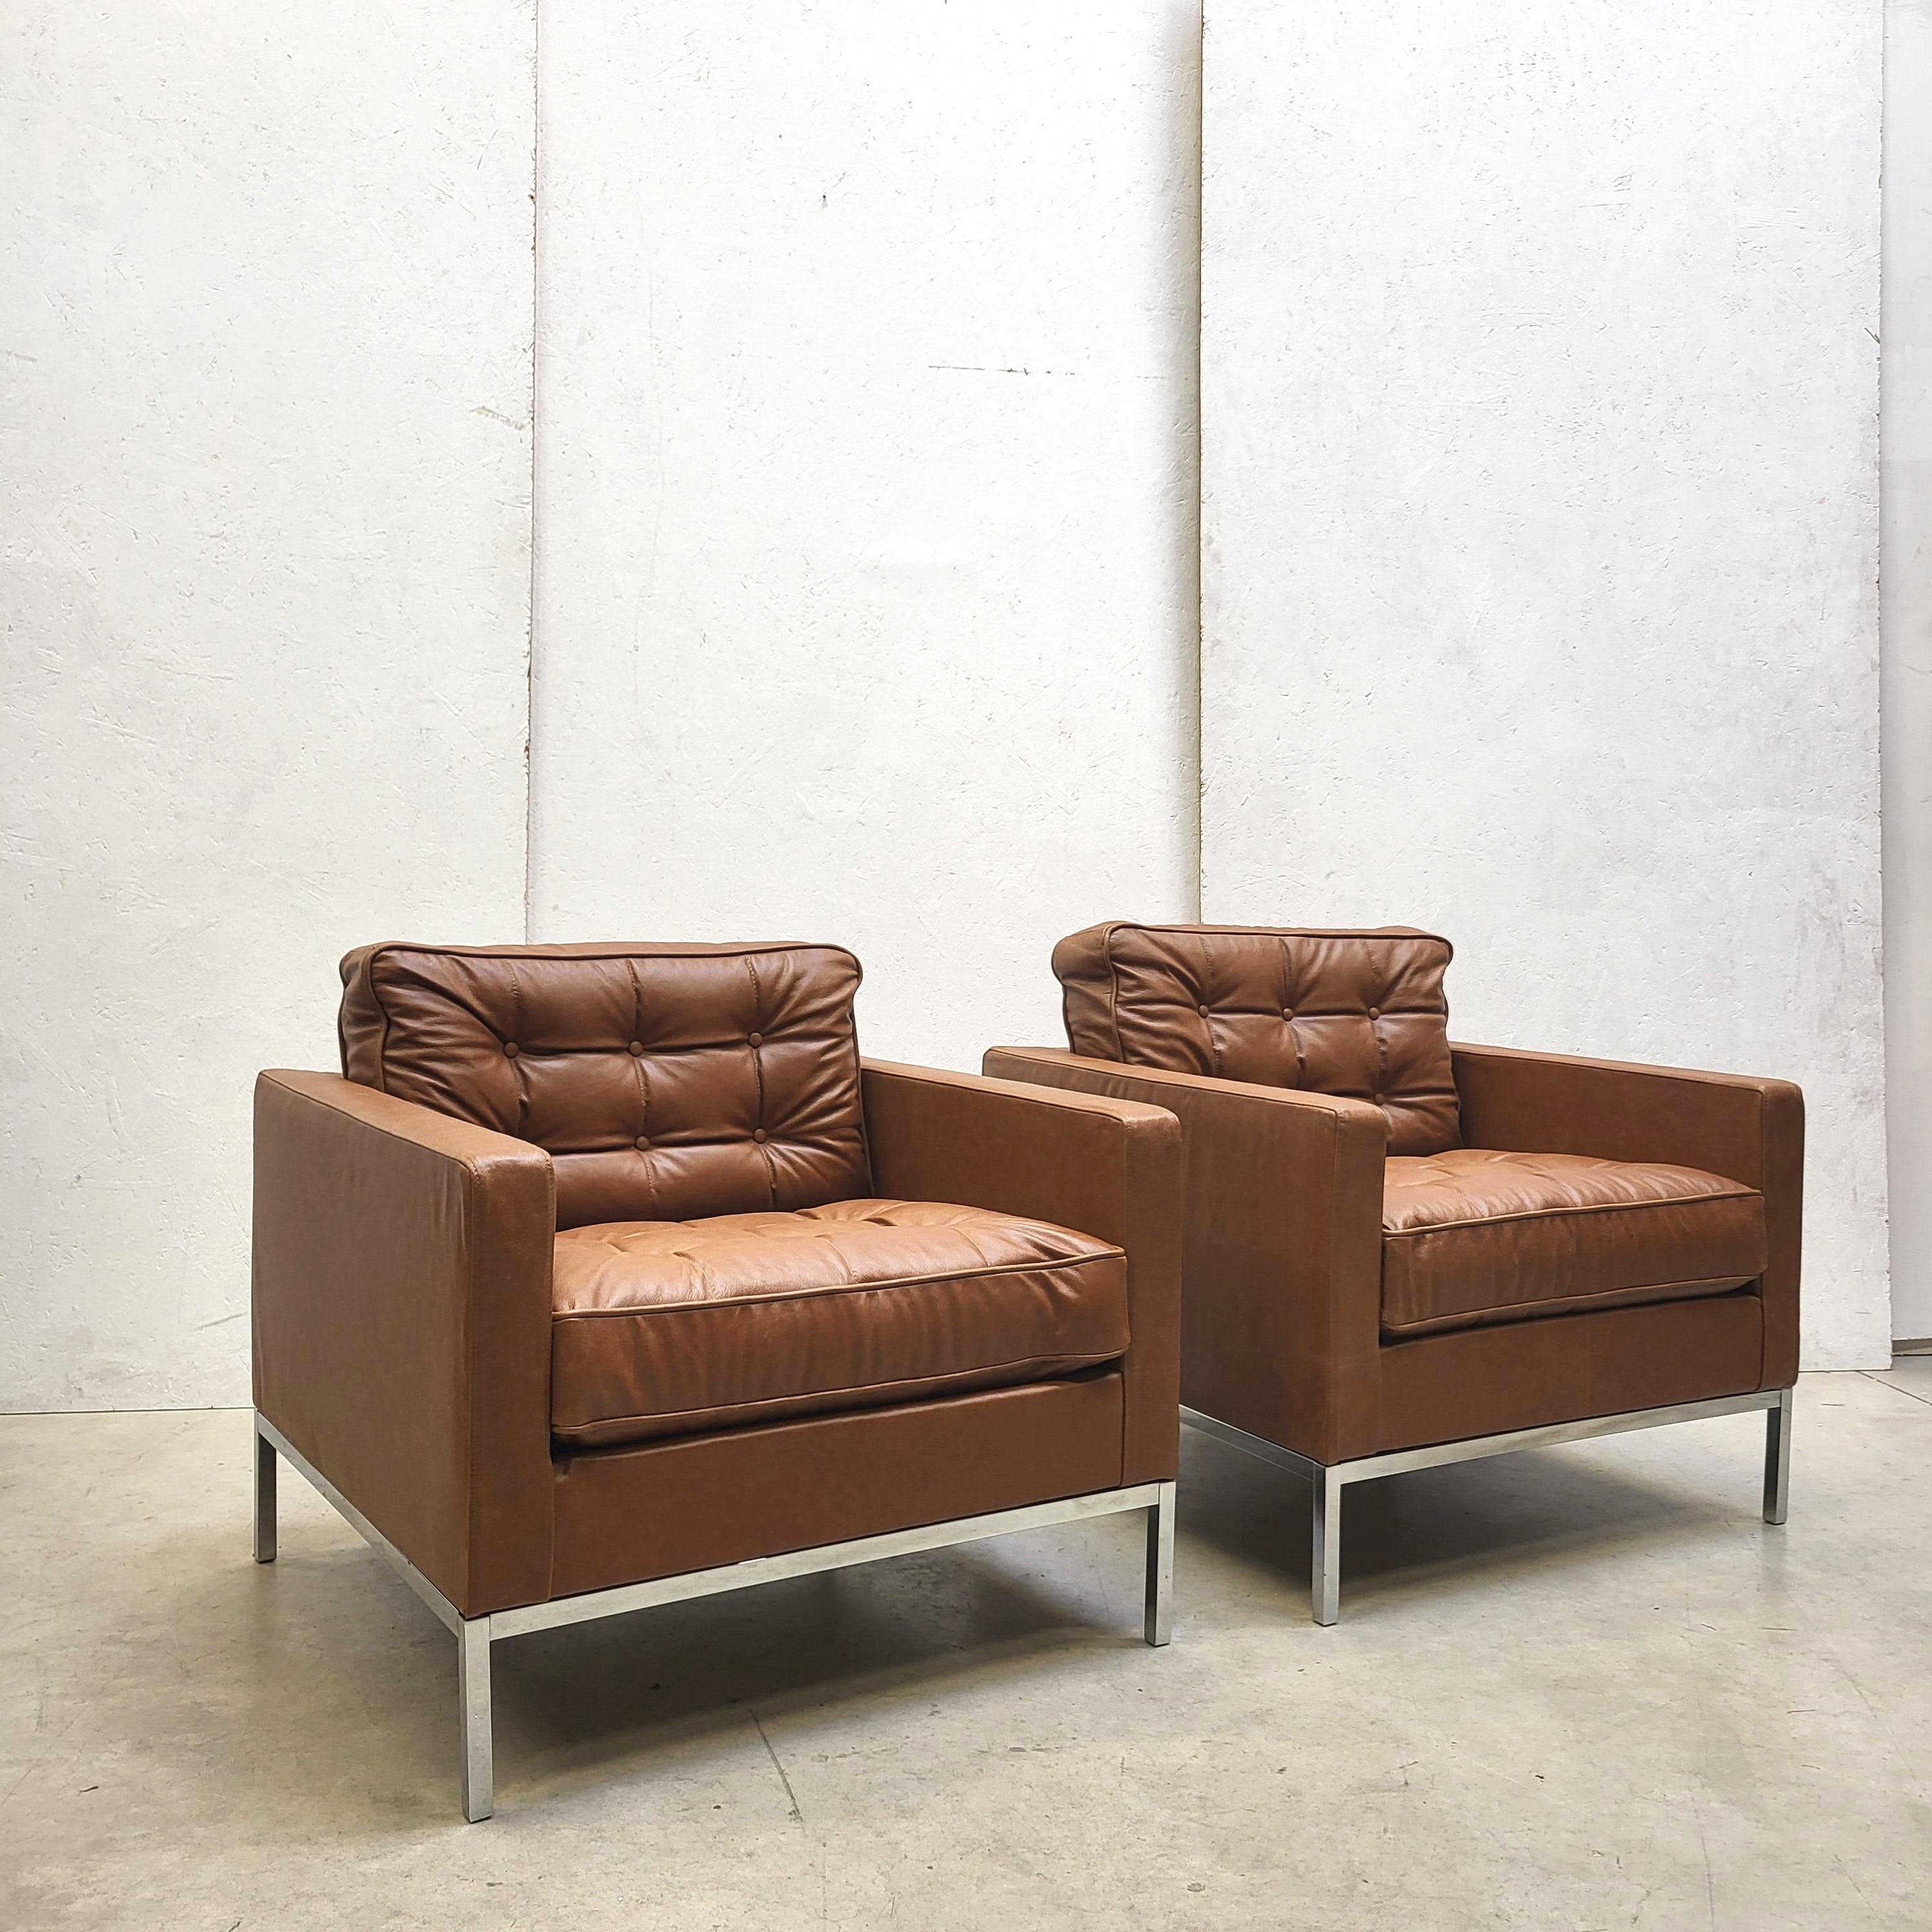 These timeless iconic club chairs were designed in 1954 by Florence Knoll and produced by Knoll in the 1960s. 
The set features 2 club lounge chairs.

The set is upholstered in an amazing Mid Brown Pinien Cognac leather and is in an excellent and